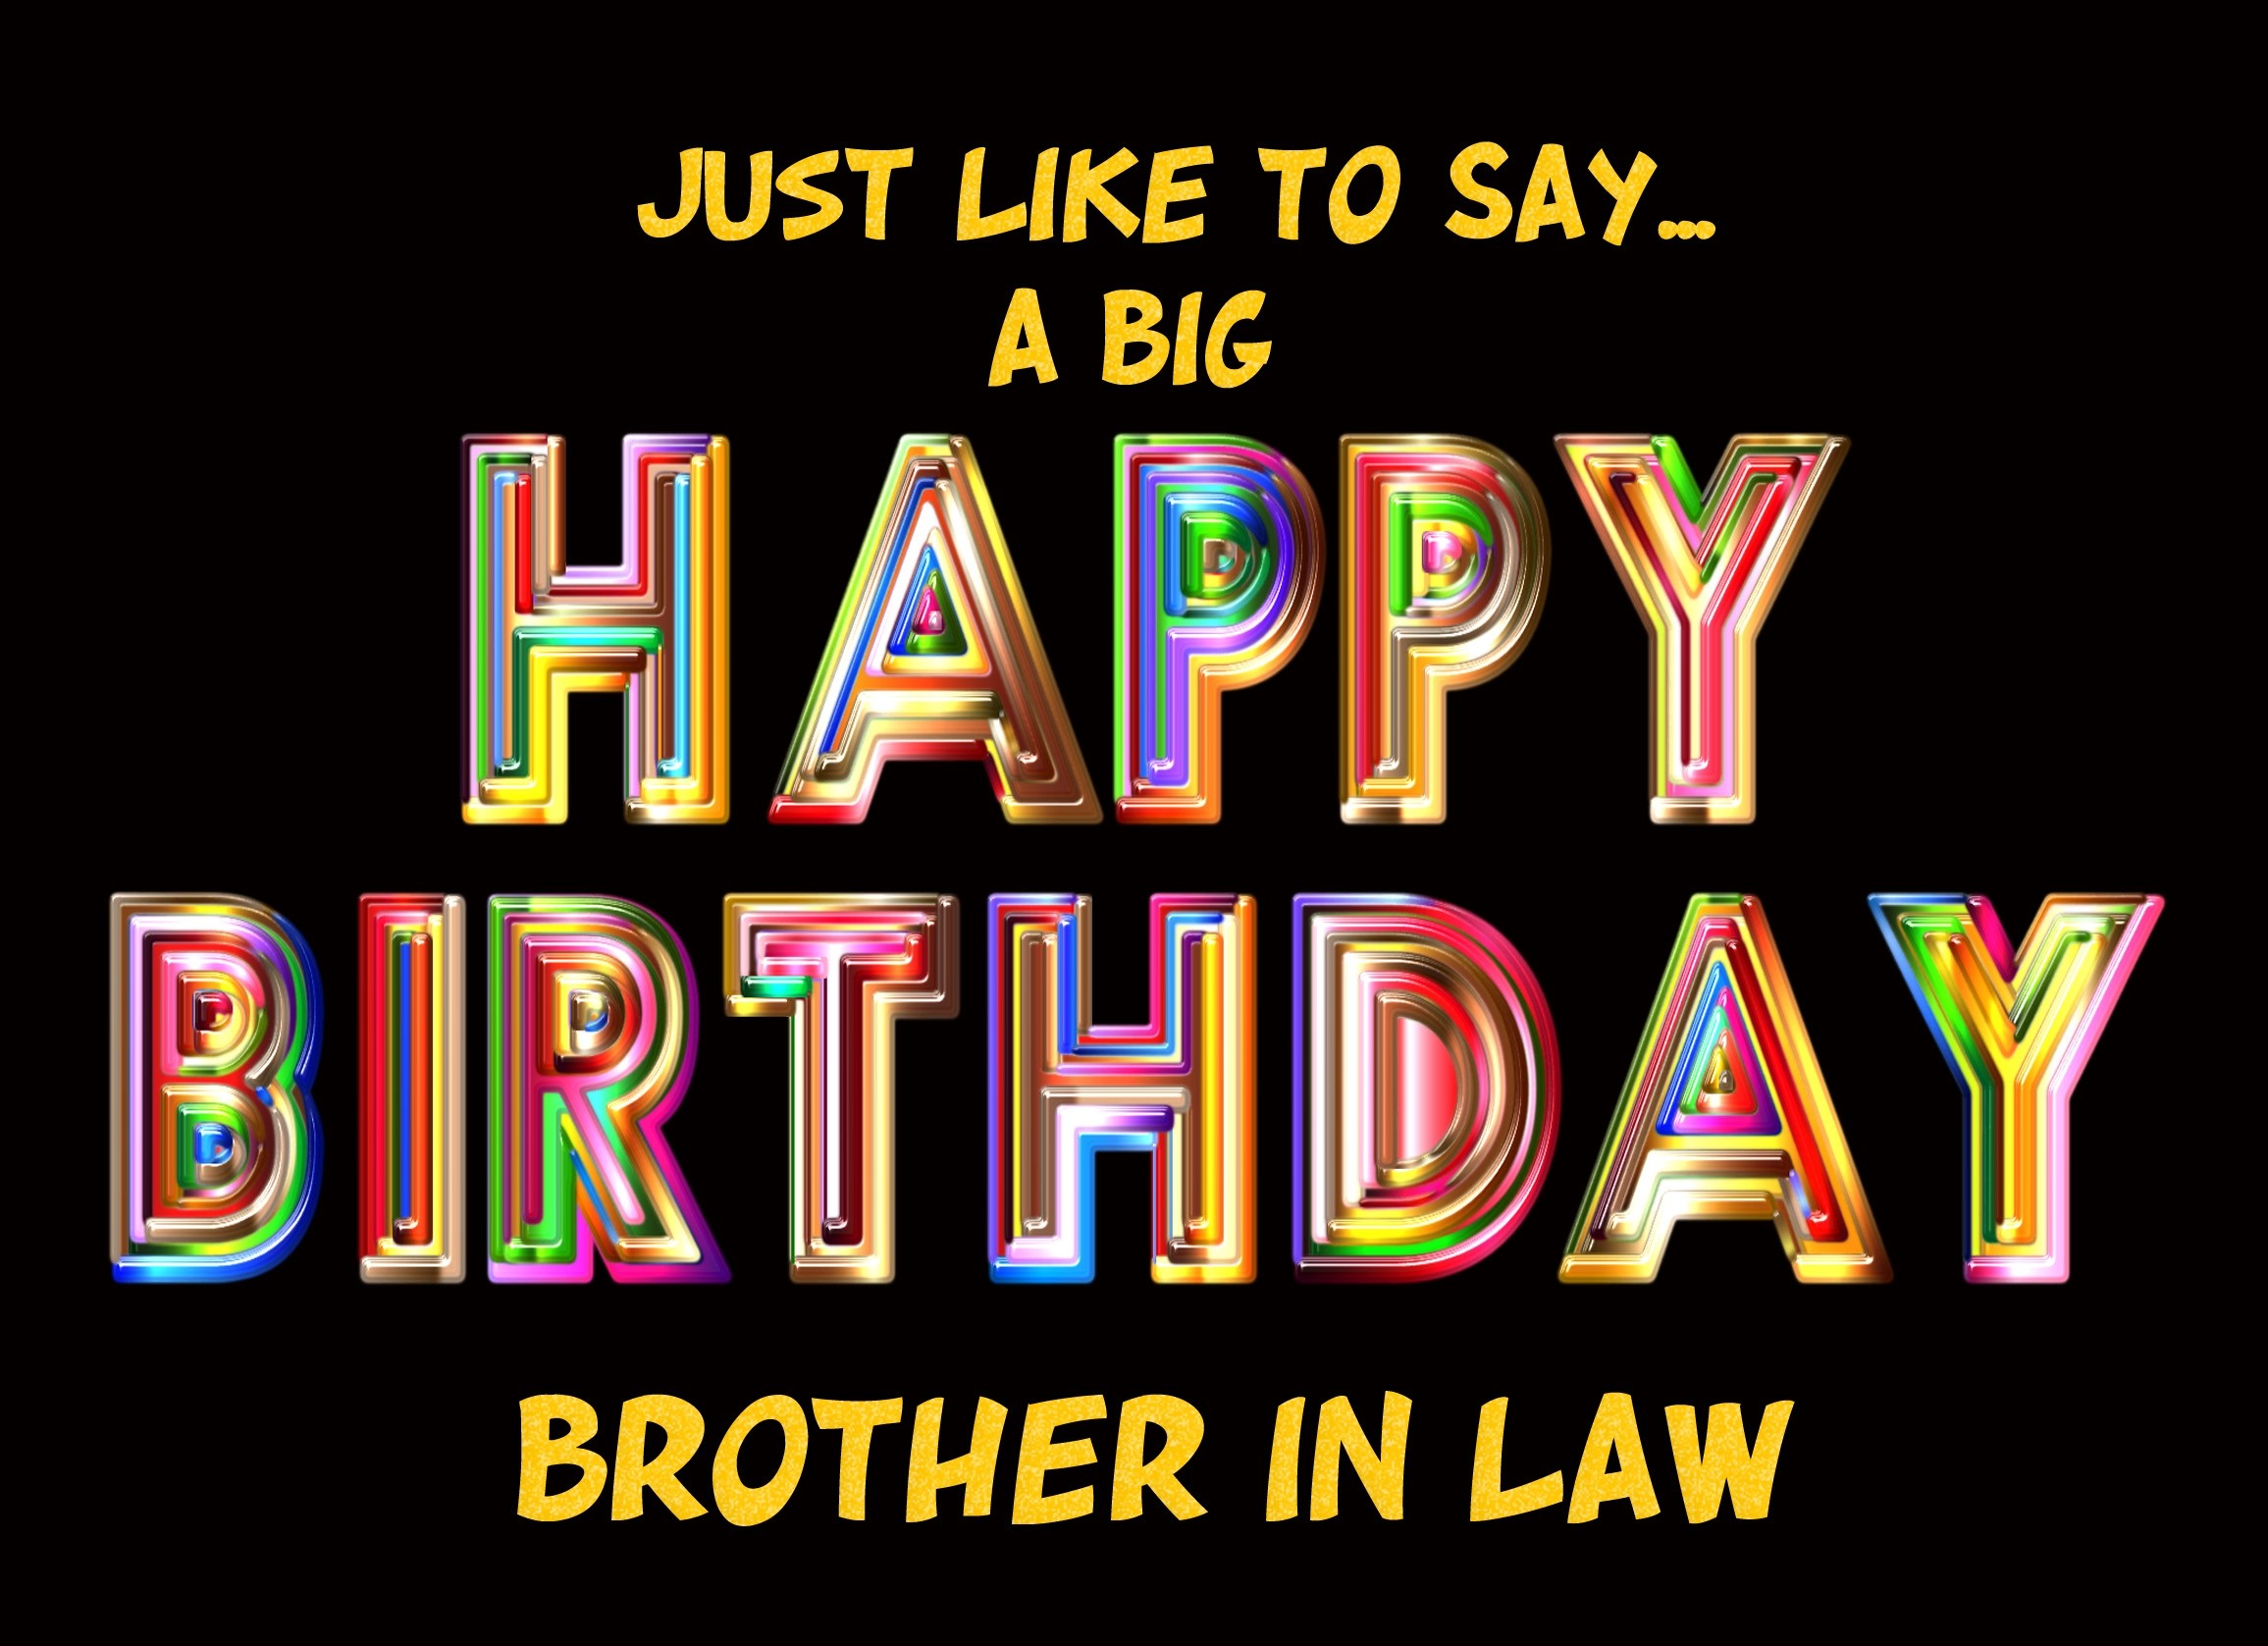 Happy Birthday 'Brother in Law' Greeting Card